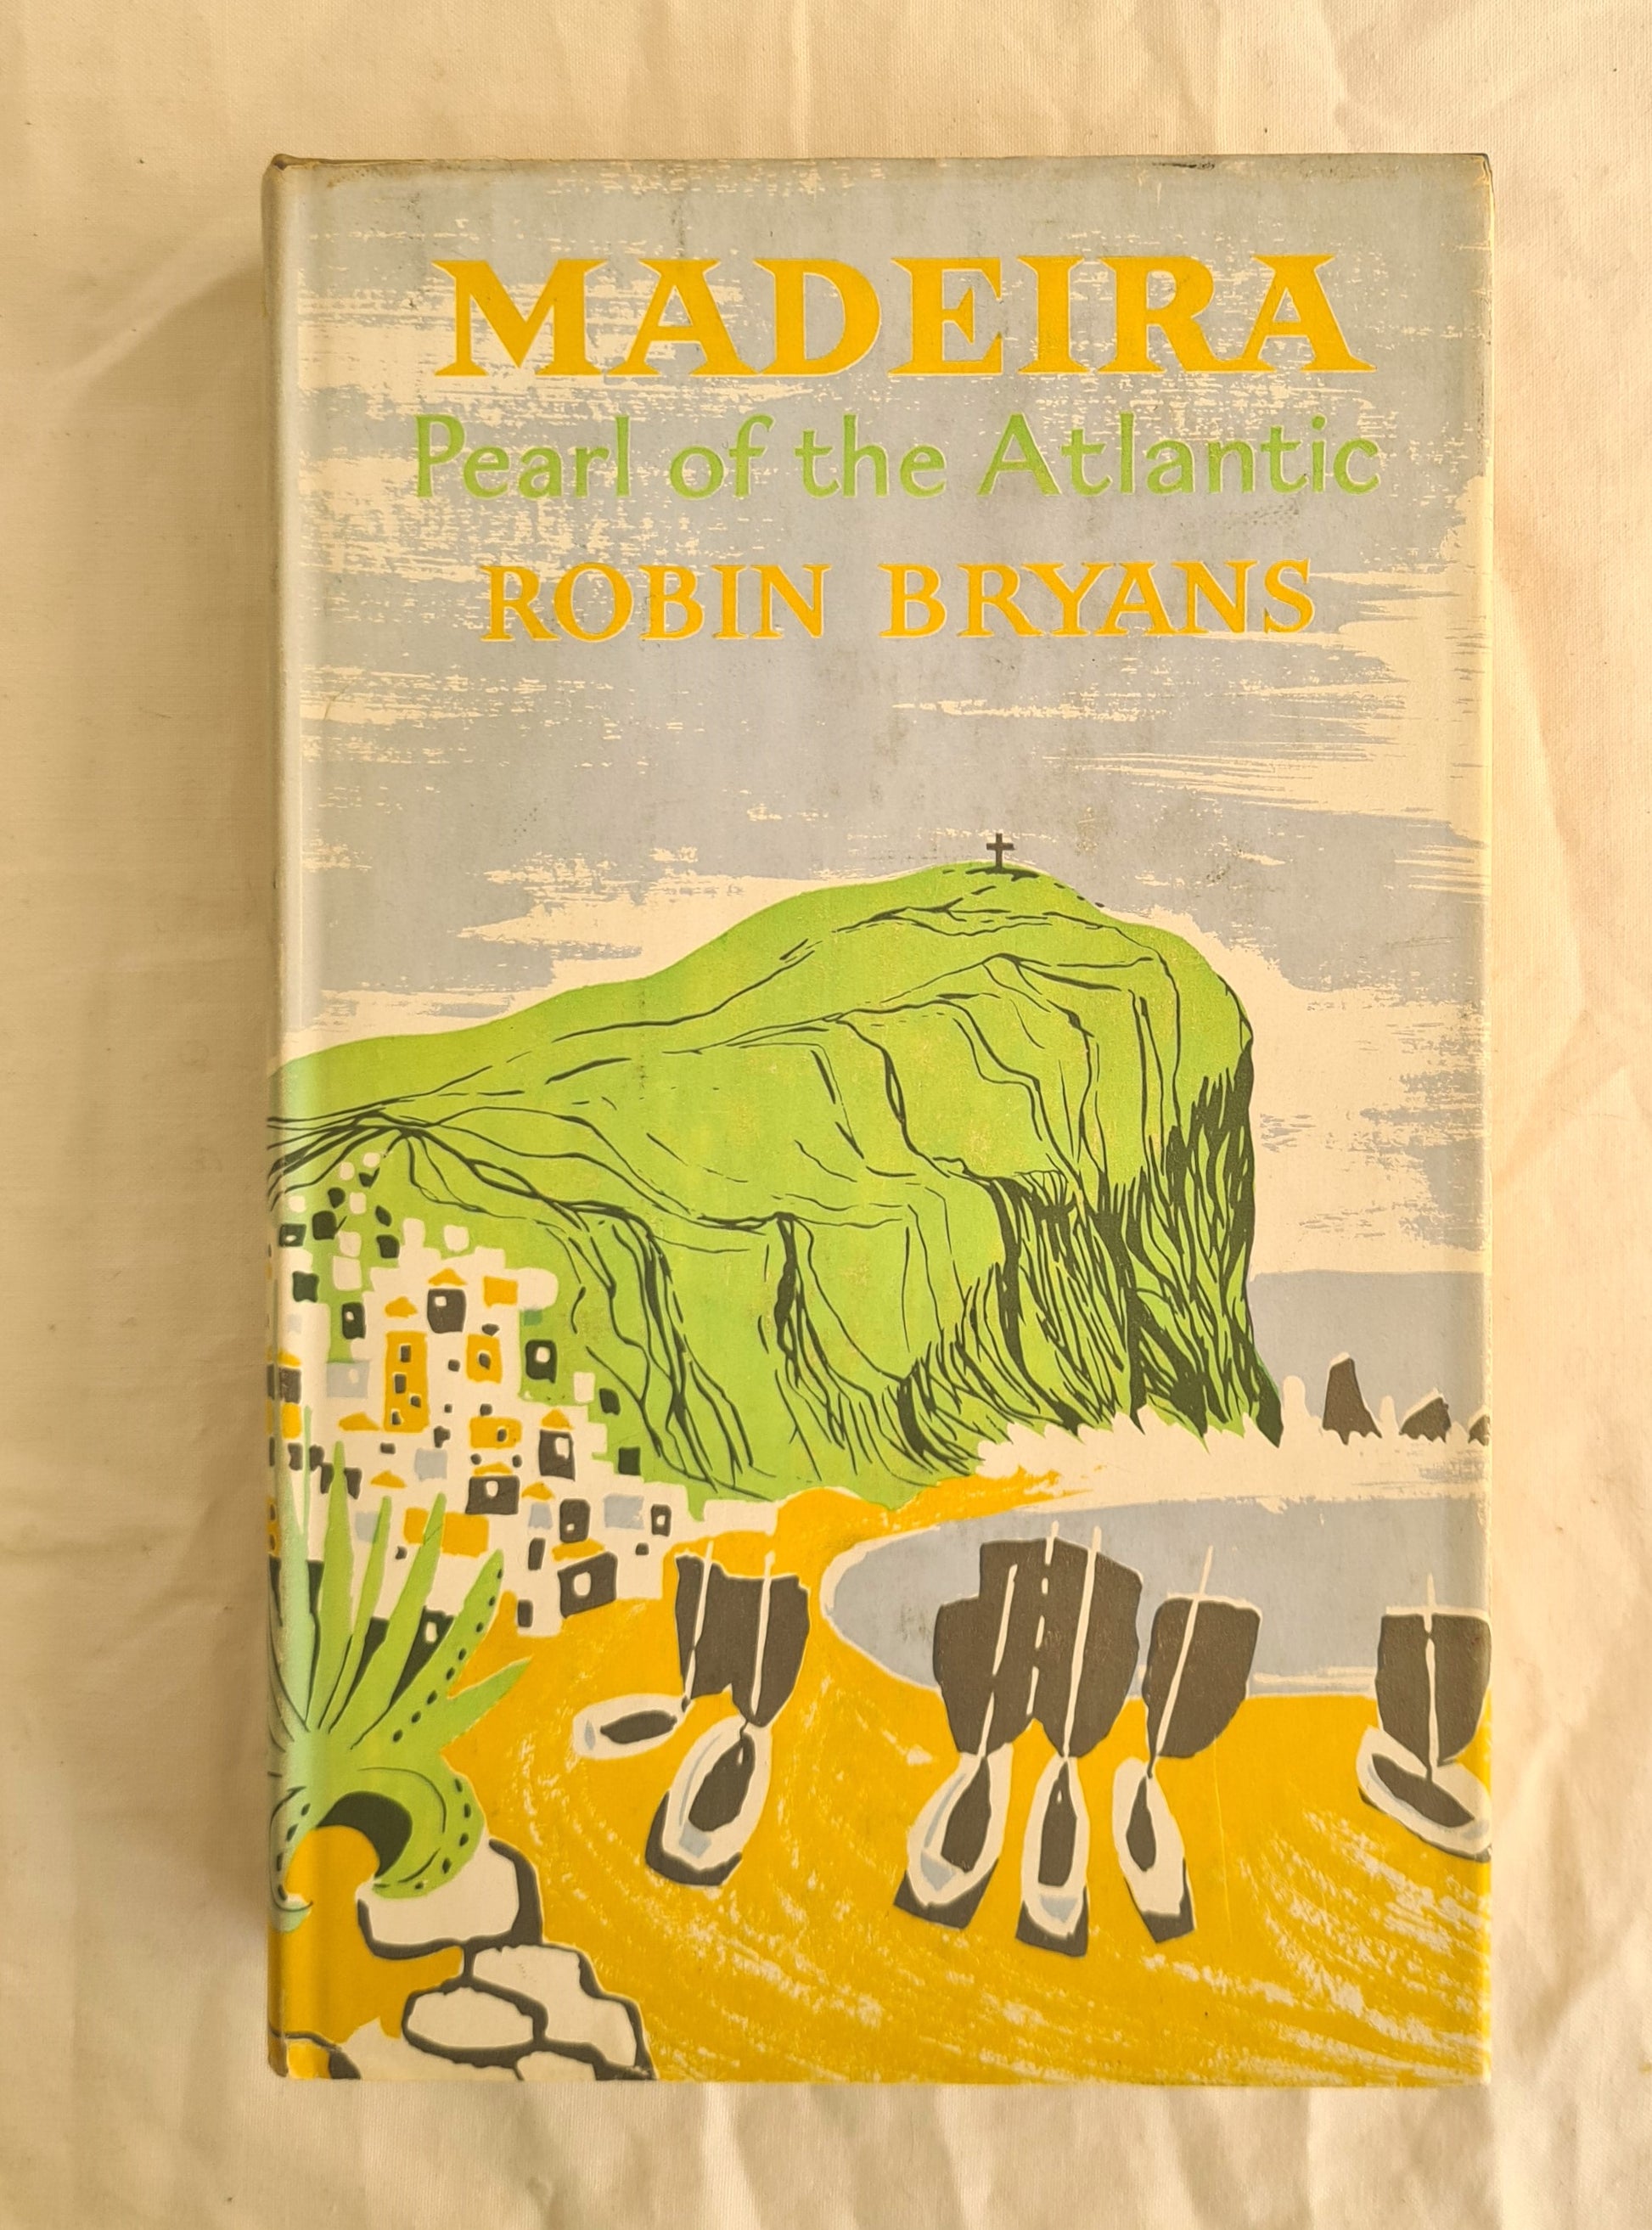 Madeira  Pearl of the Atlantic  by Robin Bryans